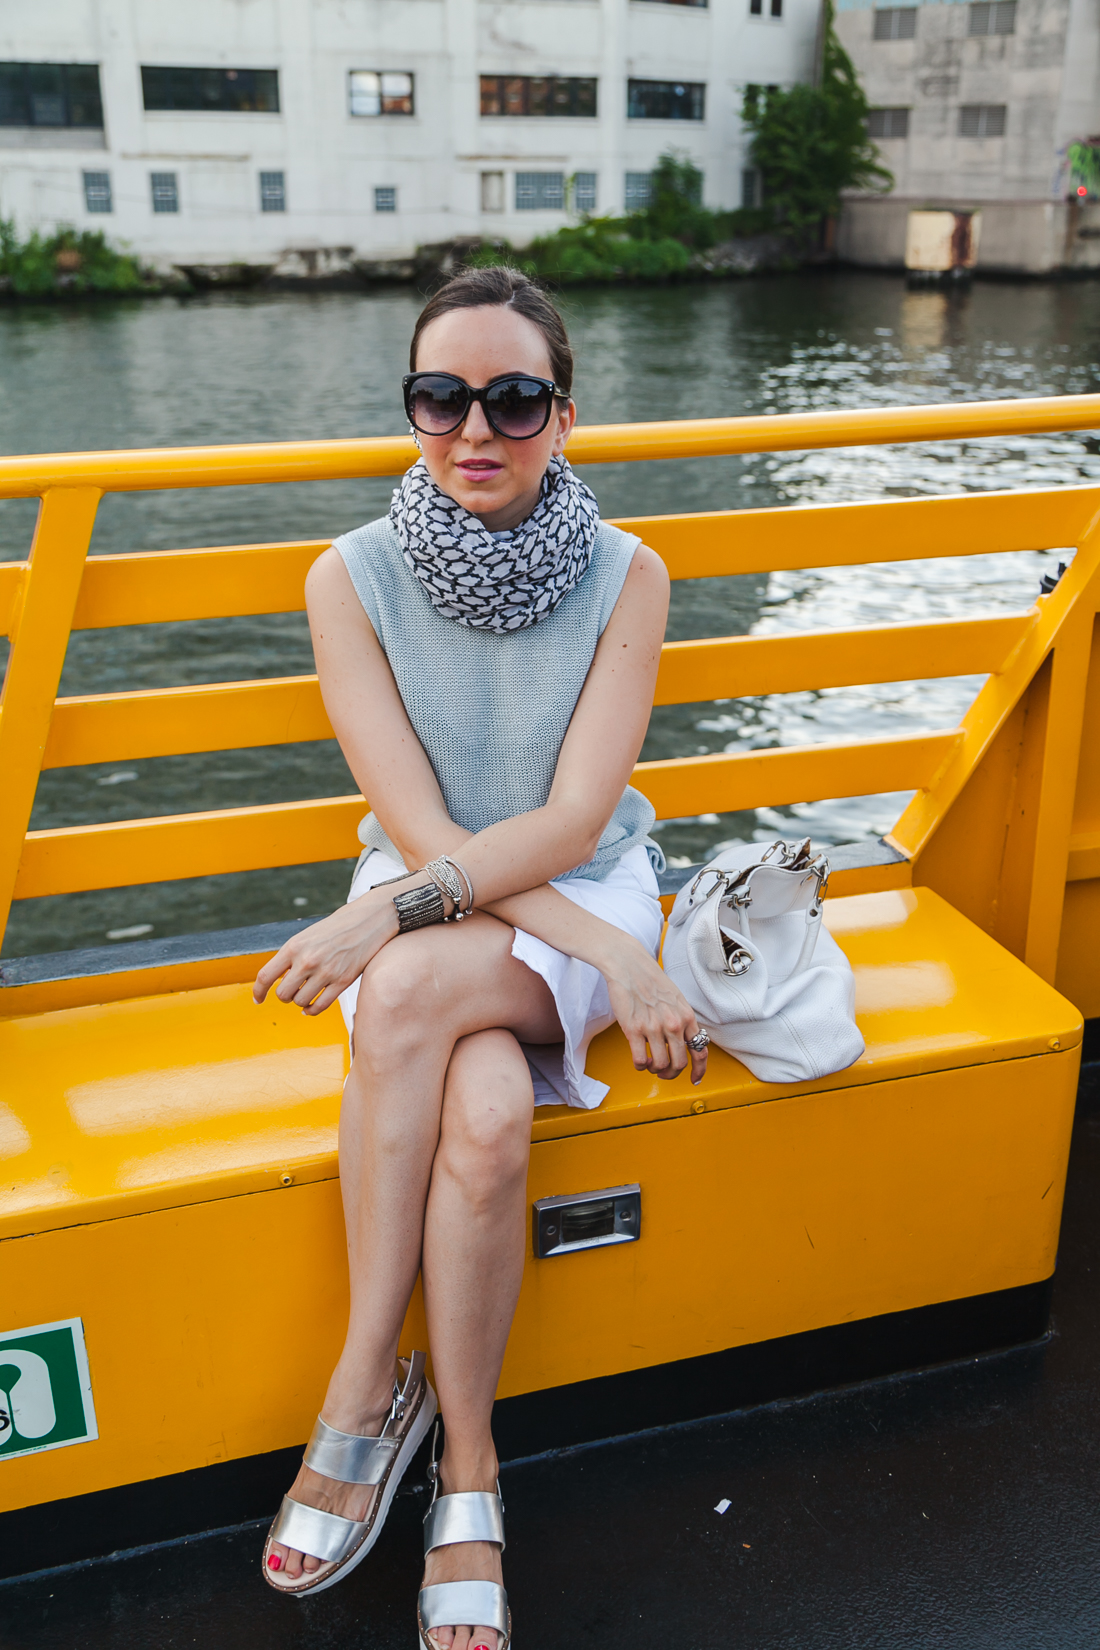 NoMad Luxuries wearing a white denim skirt and a blue linen top in Chicago on the water taxi in the Summer